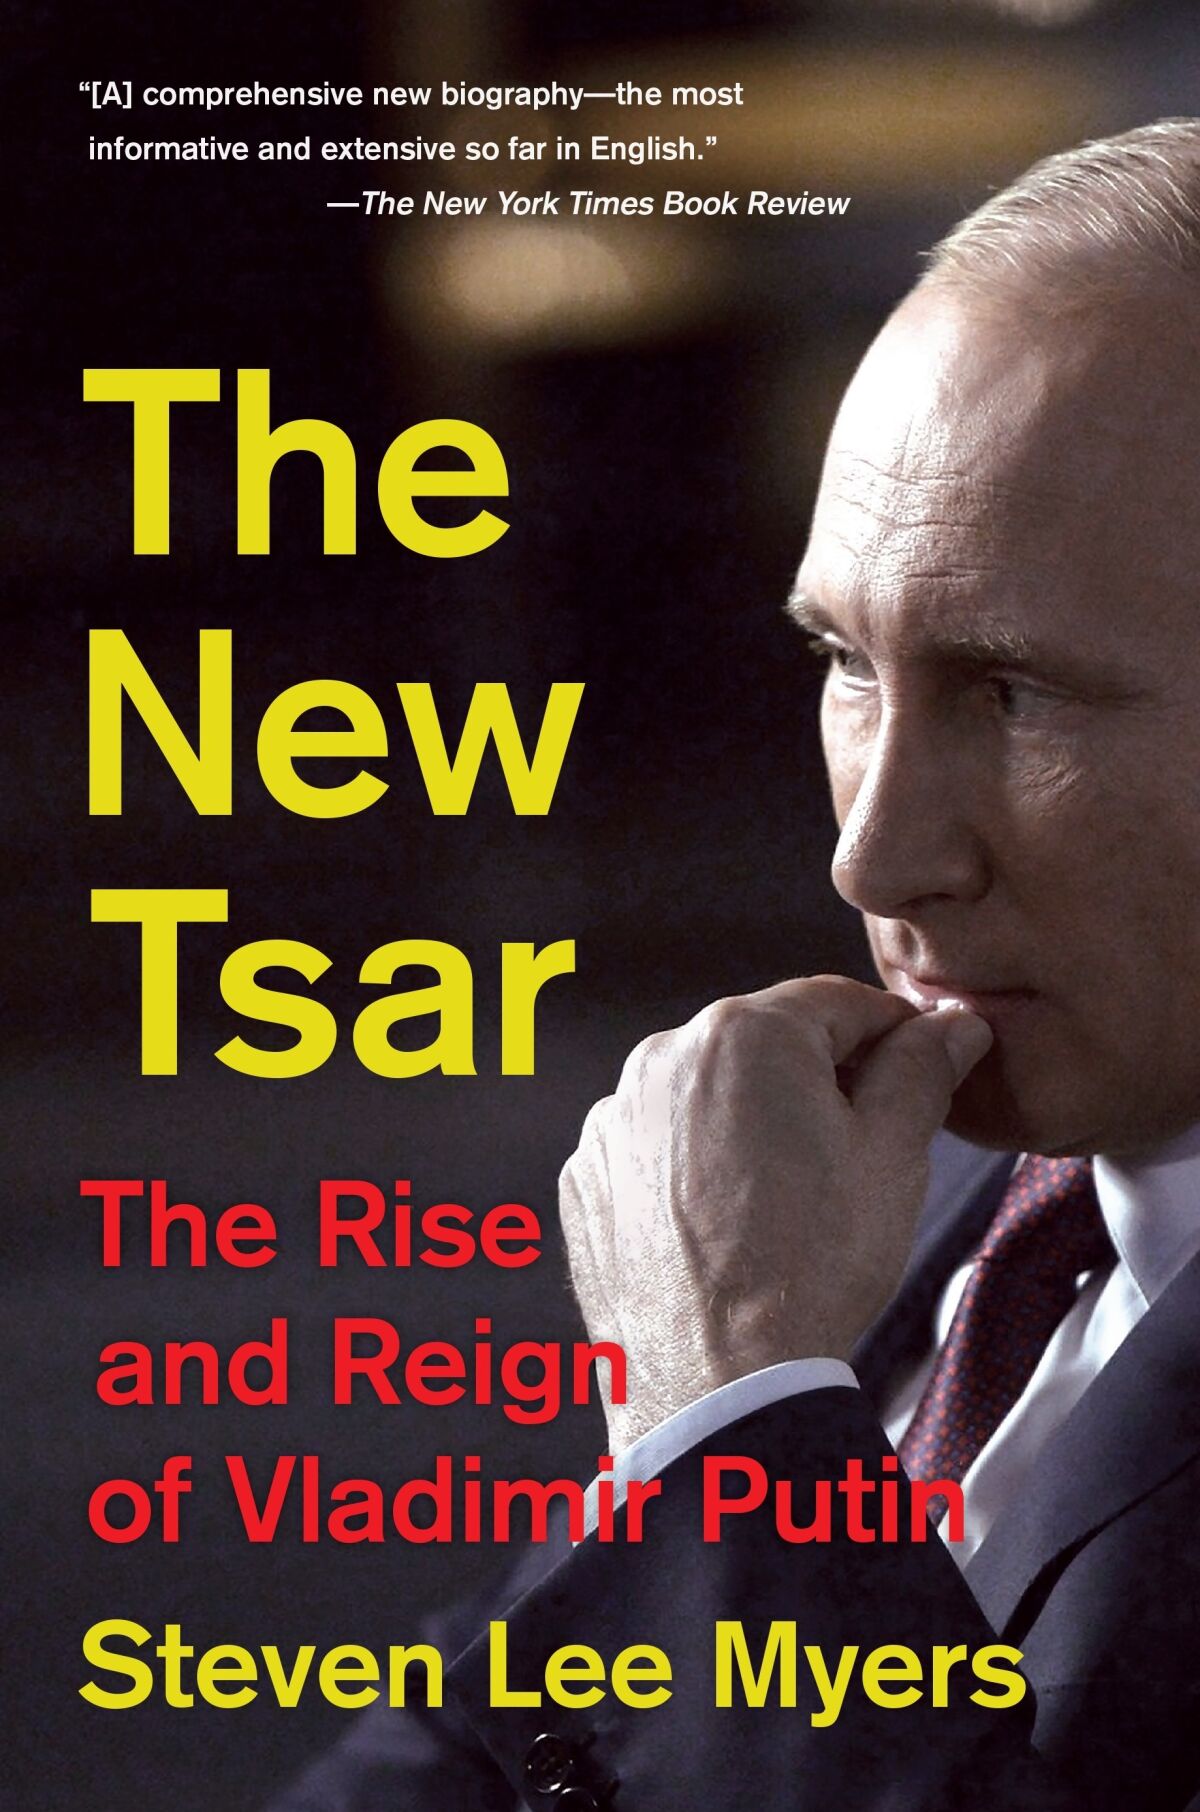 The cover of "The New Tsar" 